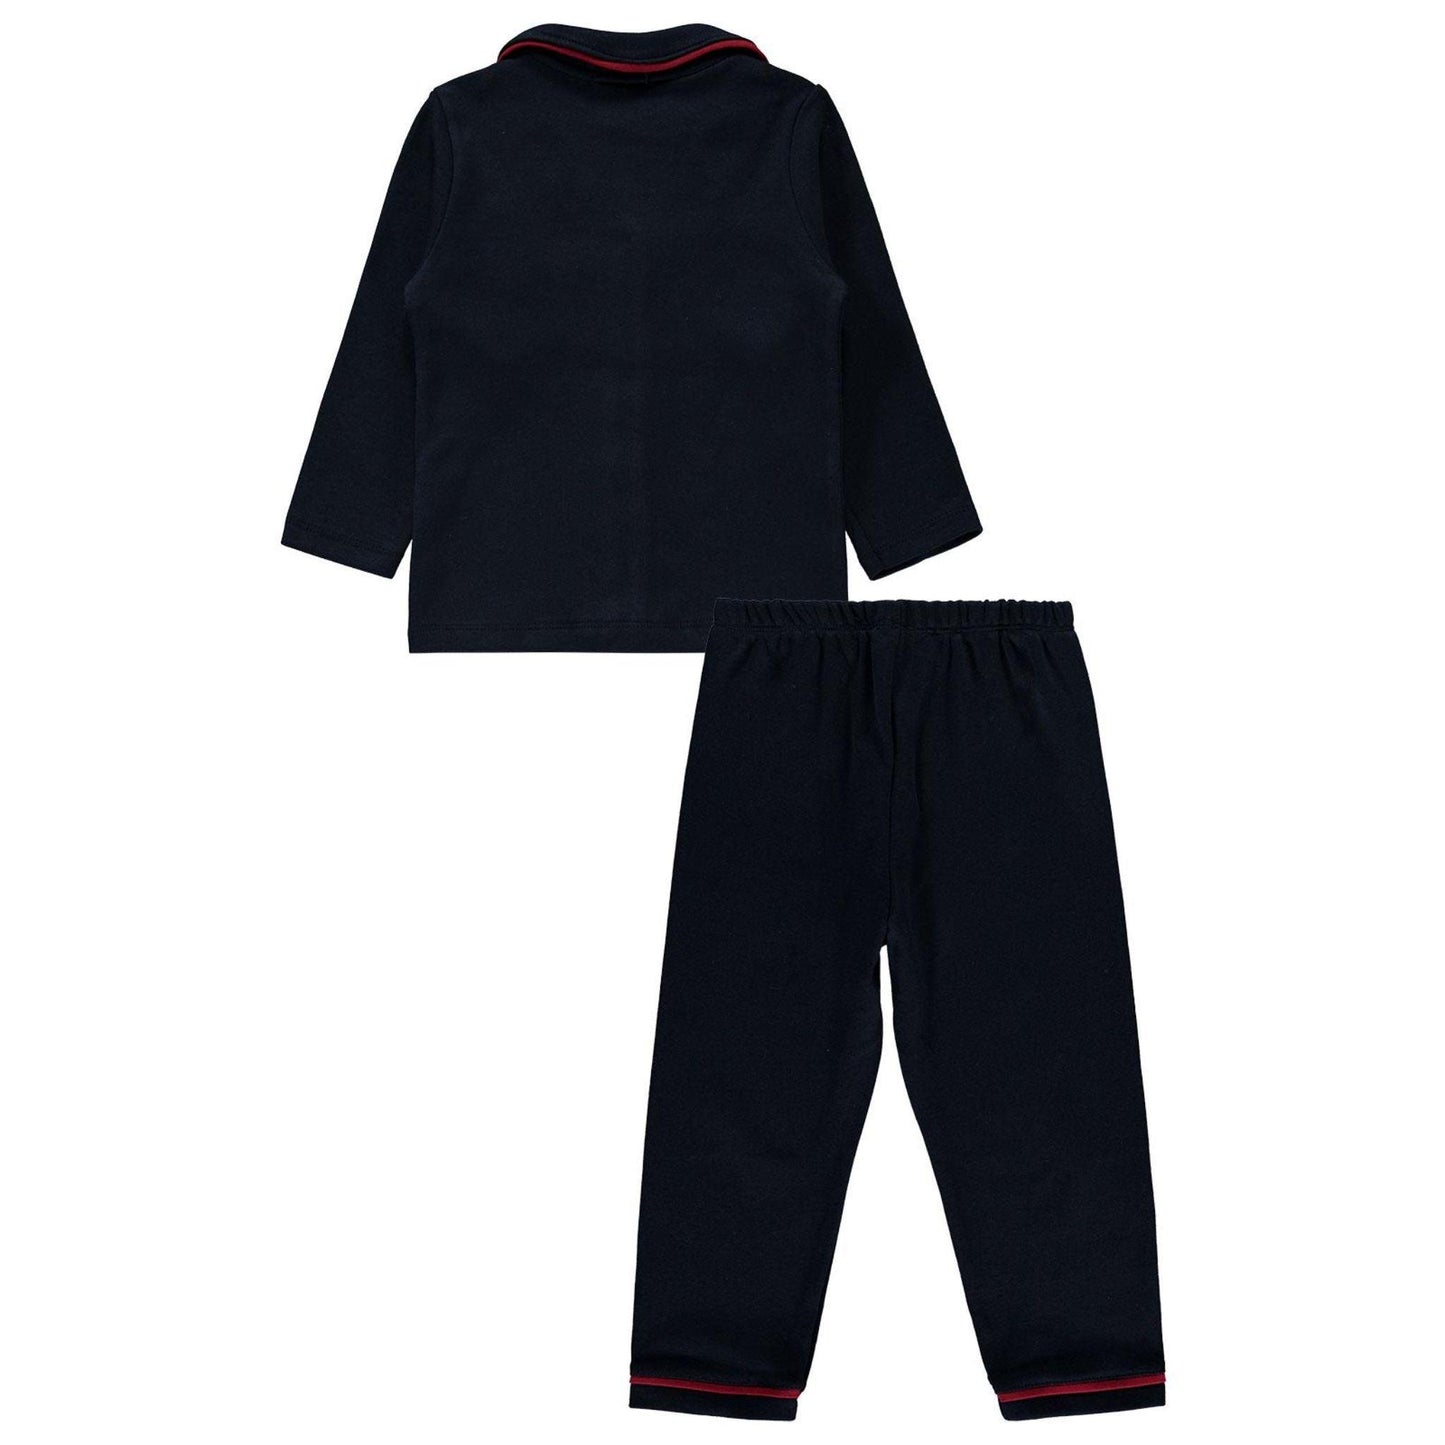 Navy Blue Two-Piece Buttoned Pajamas